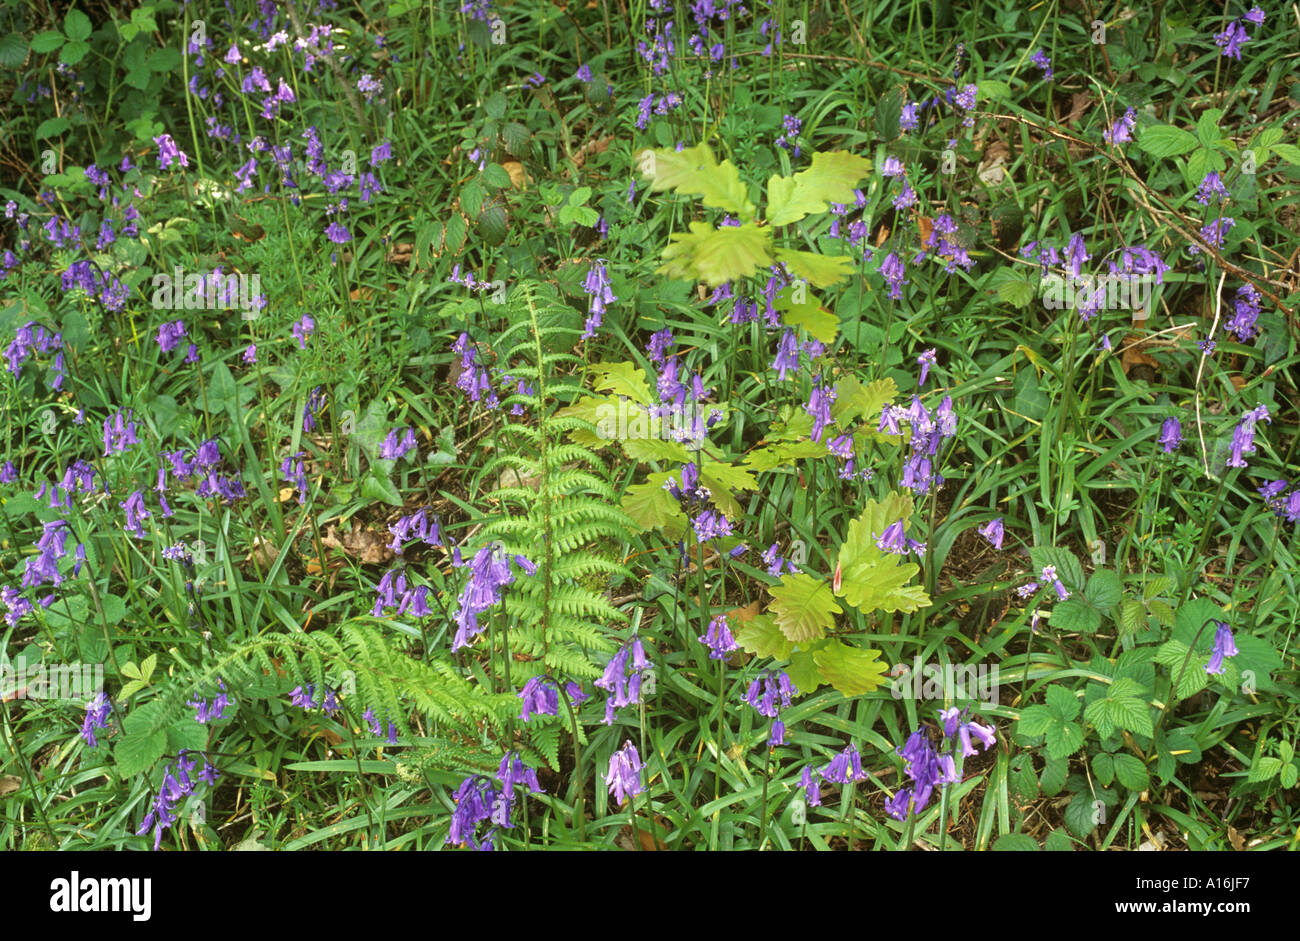 Fern and oak sapling among bluebells in a wood Stock Photo